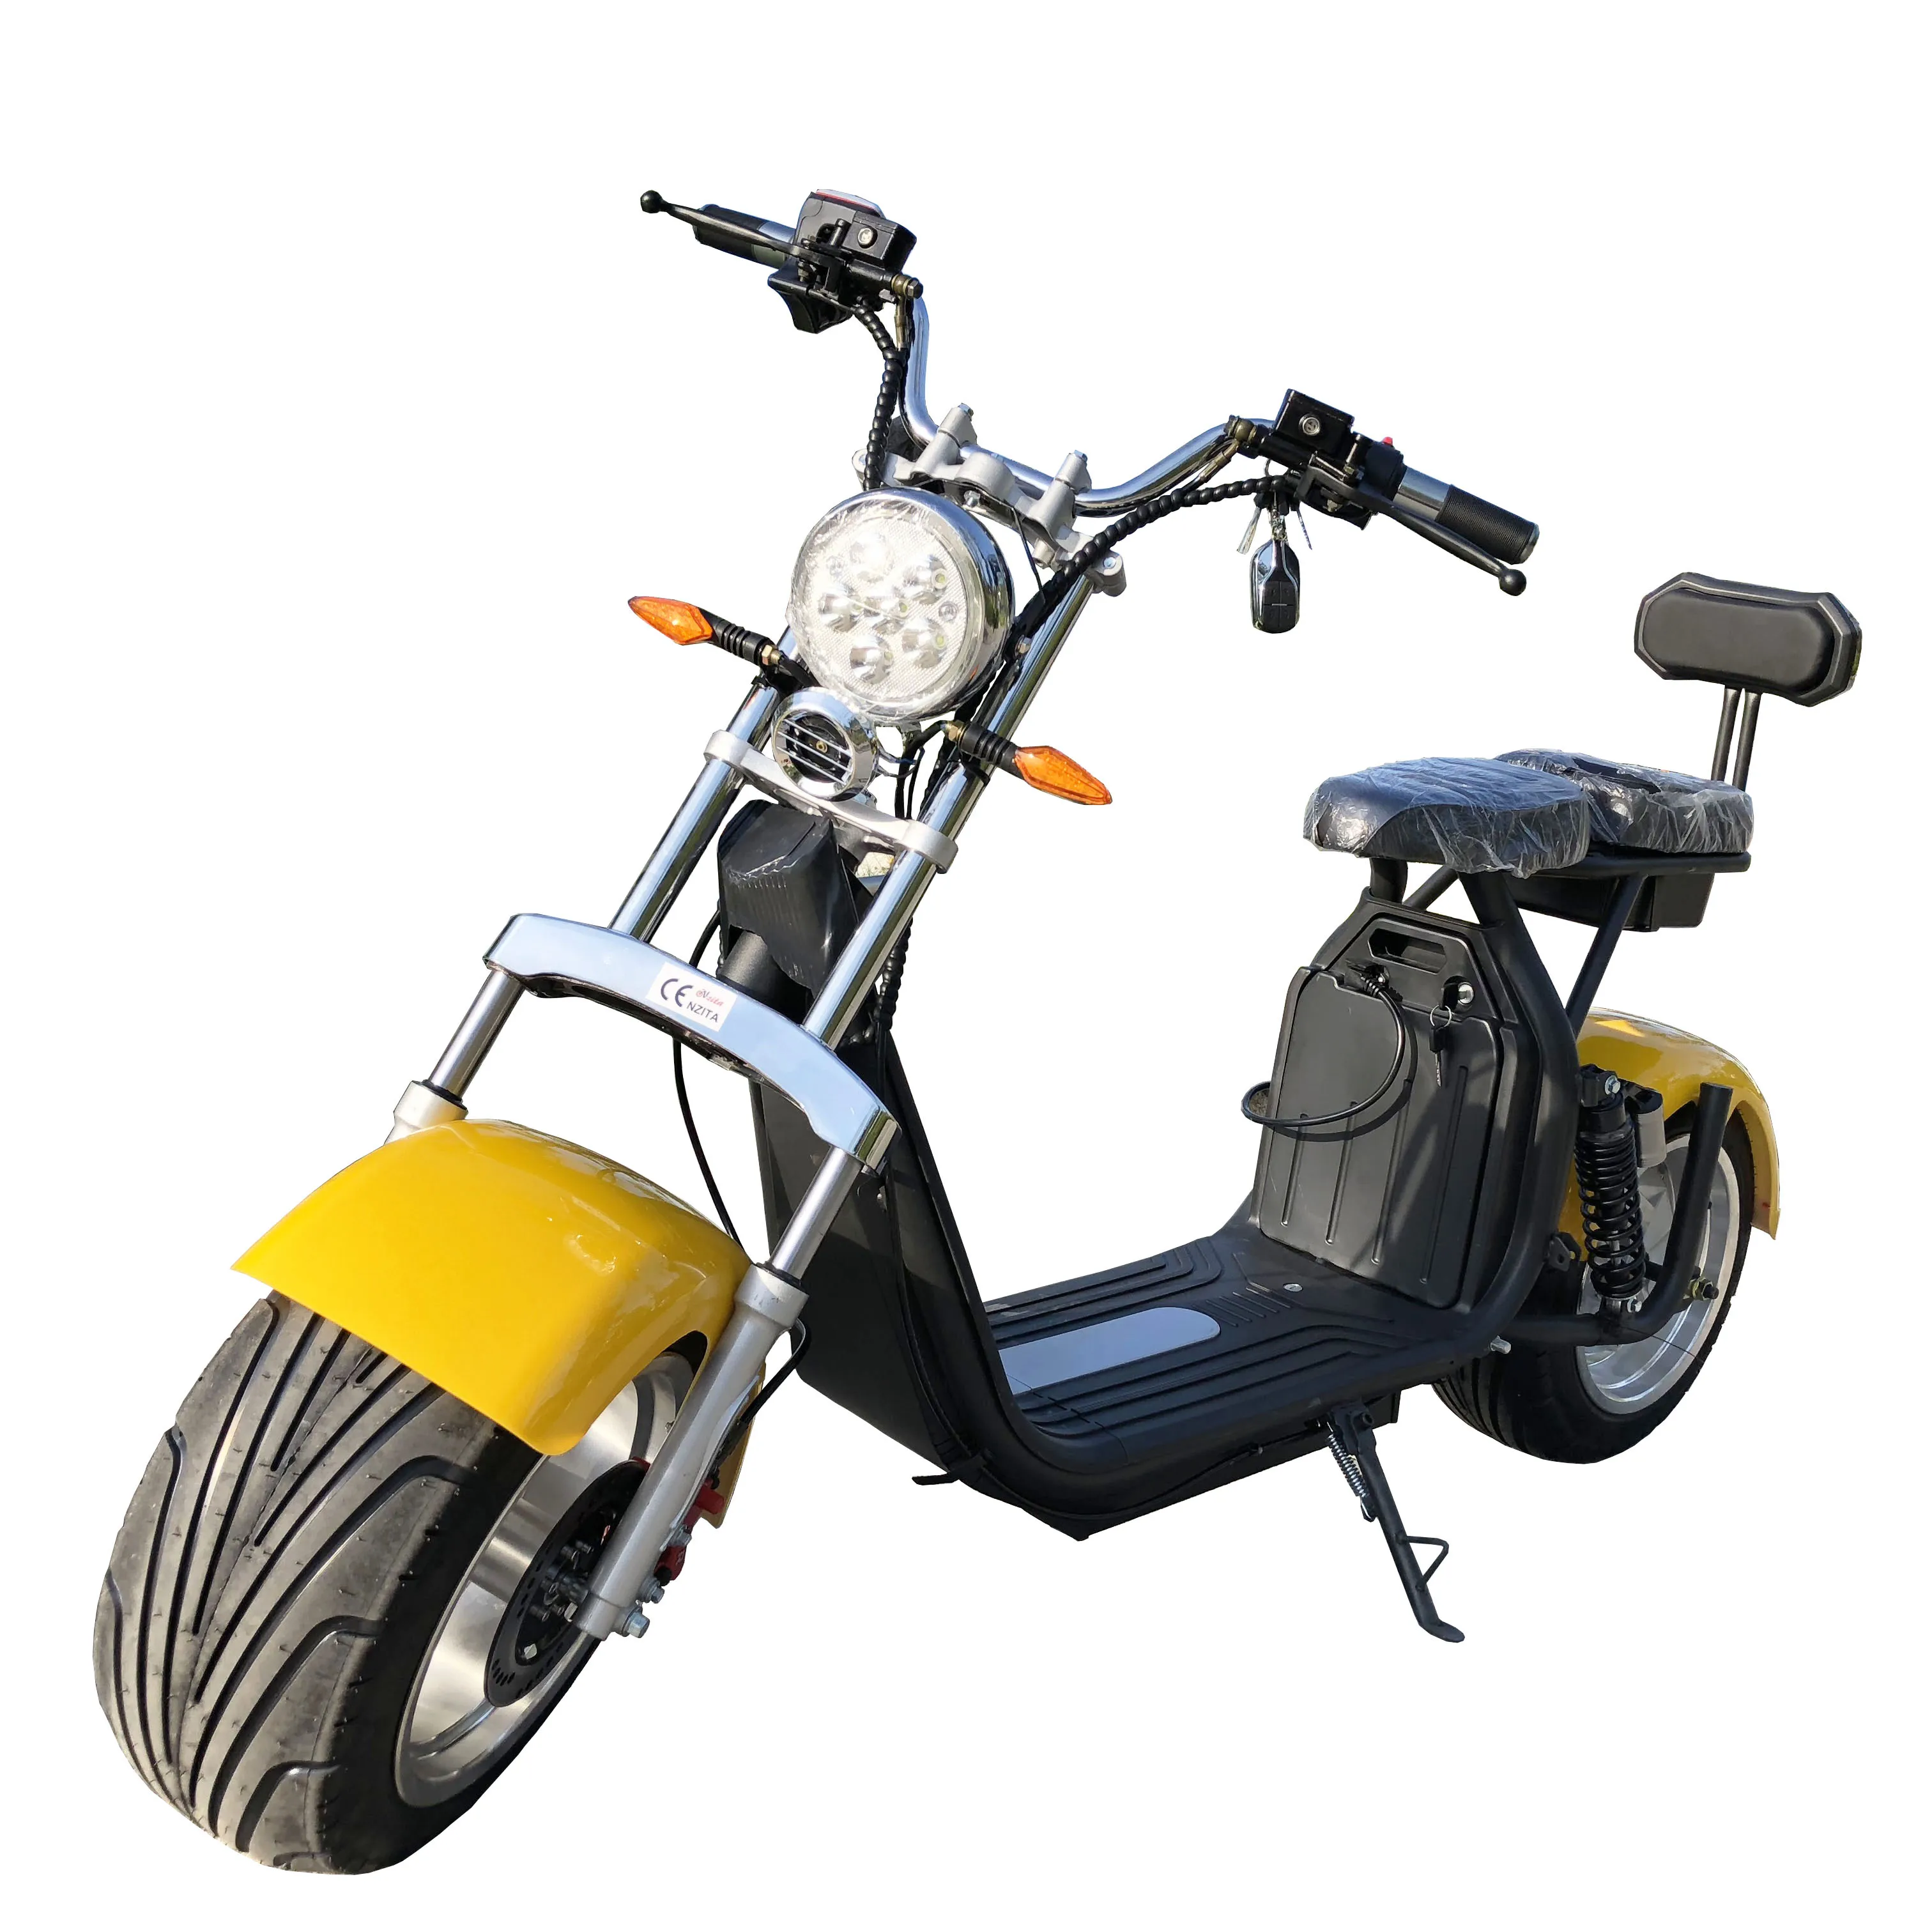 

door to door Factory Cheaper EU Homologation EEC/COC Citycoco 1500W with Double Lithium Battery 60V,20AH Electric Scooter Europe